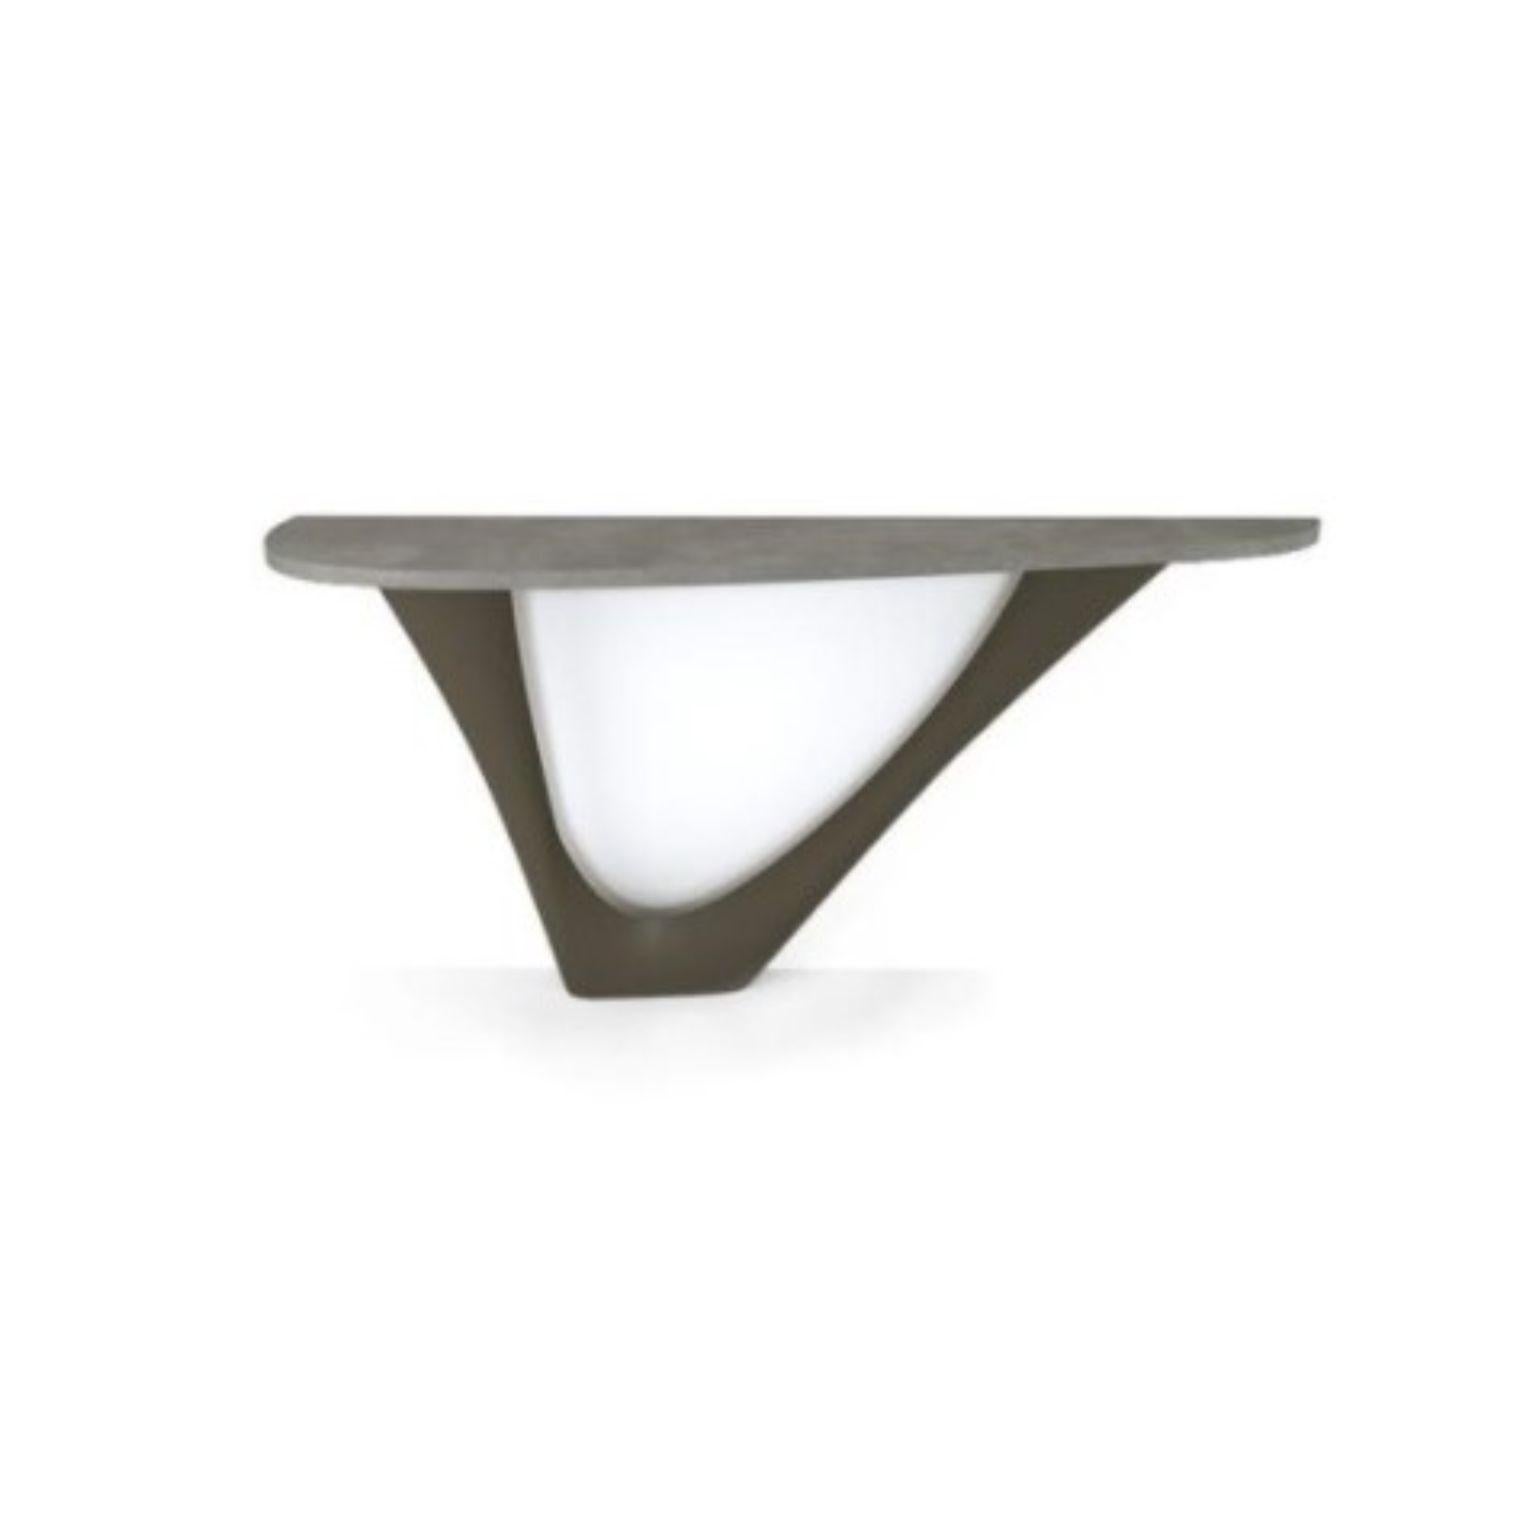 Umbra Grey G-Console Mono Steel Base with Concrete Top by Zieta
Dimensions: D 43 x W 159 x H 75 cm 
Material: Concrete, carbon steel.
Also available in different colors and dimensions. Please contact us.

G-Console is another bionic object in our